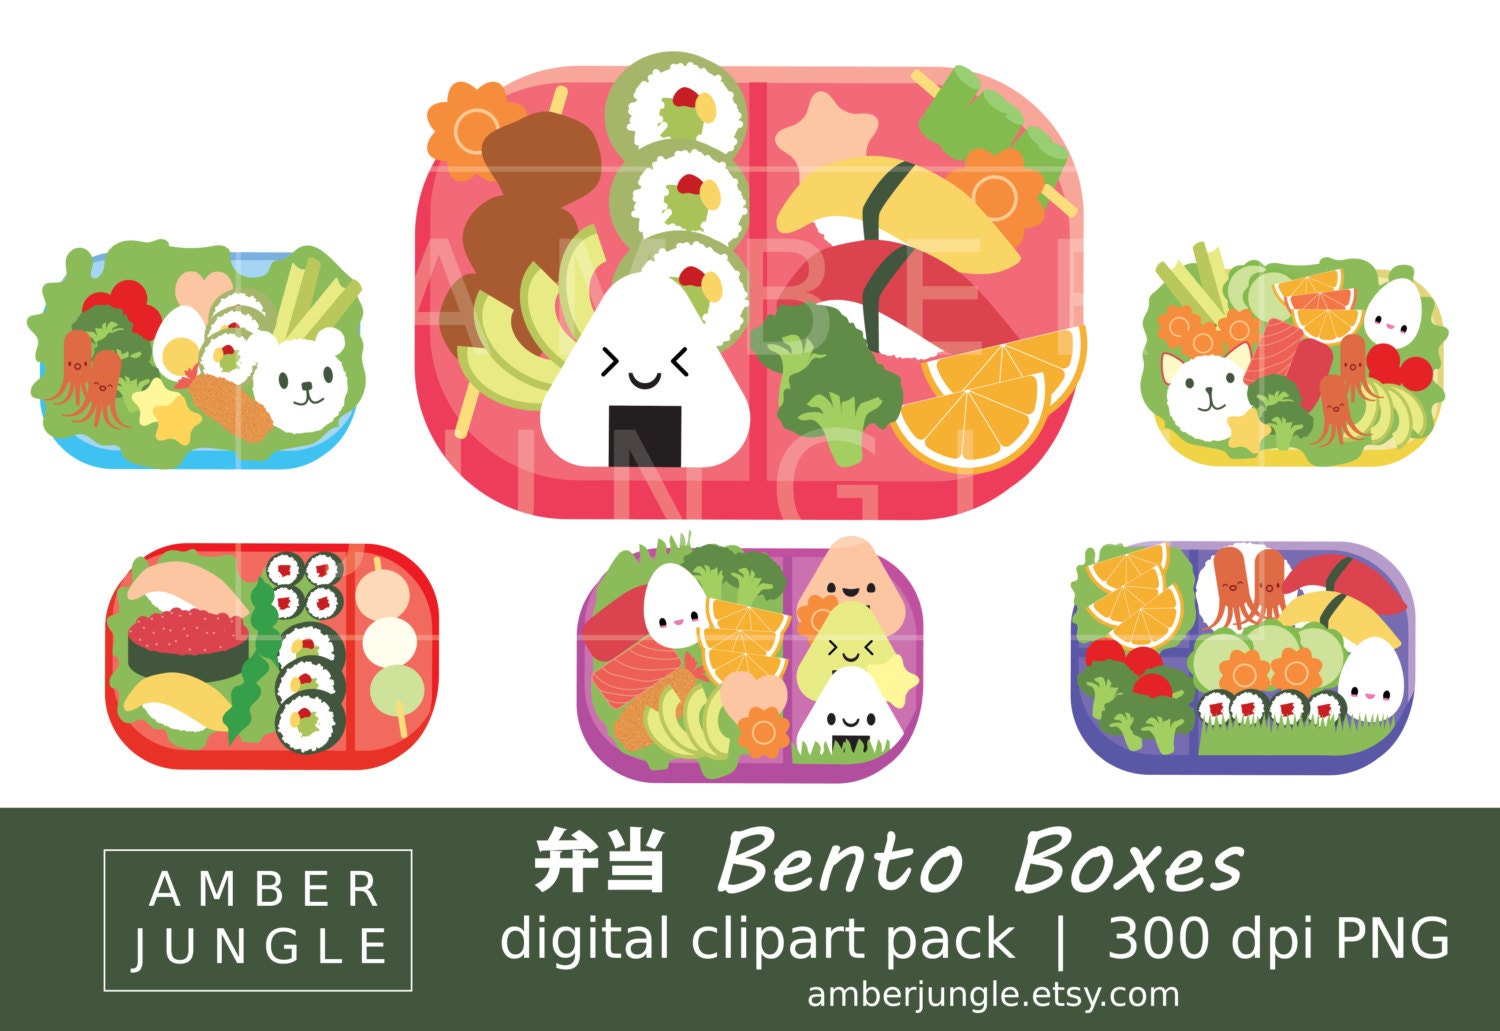 12 Anime Bento Box Clipart Images, Commercial Use PNG JPG 300DPI, Digital  Download, Arts & Crafts, Graphic Design, High Quality 